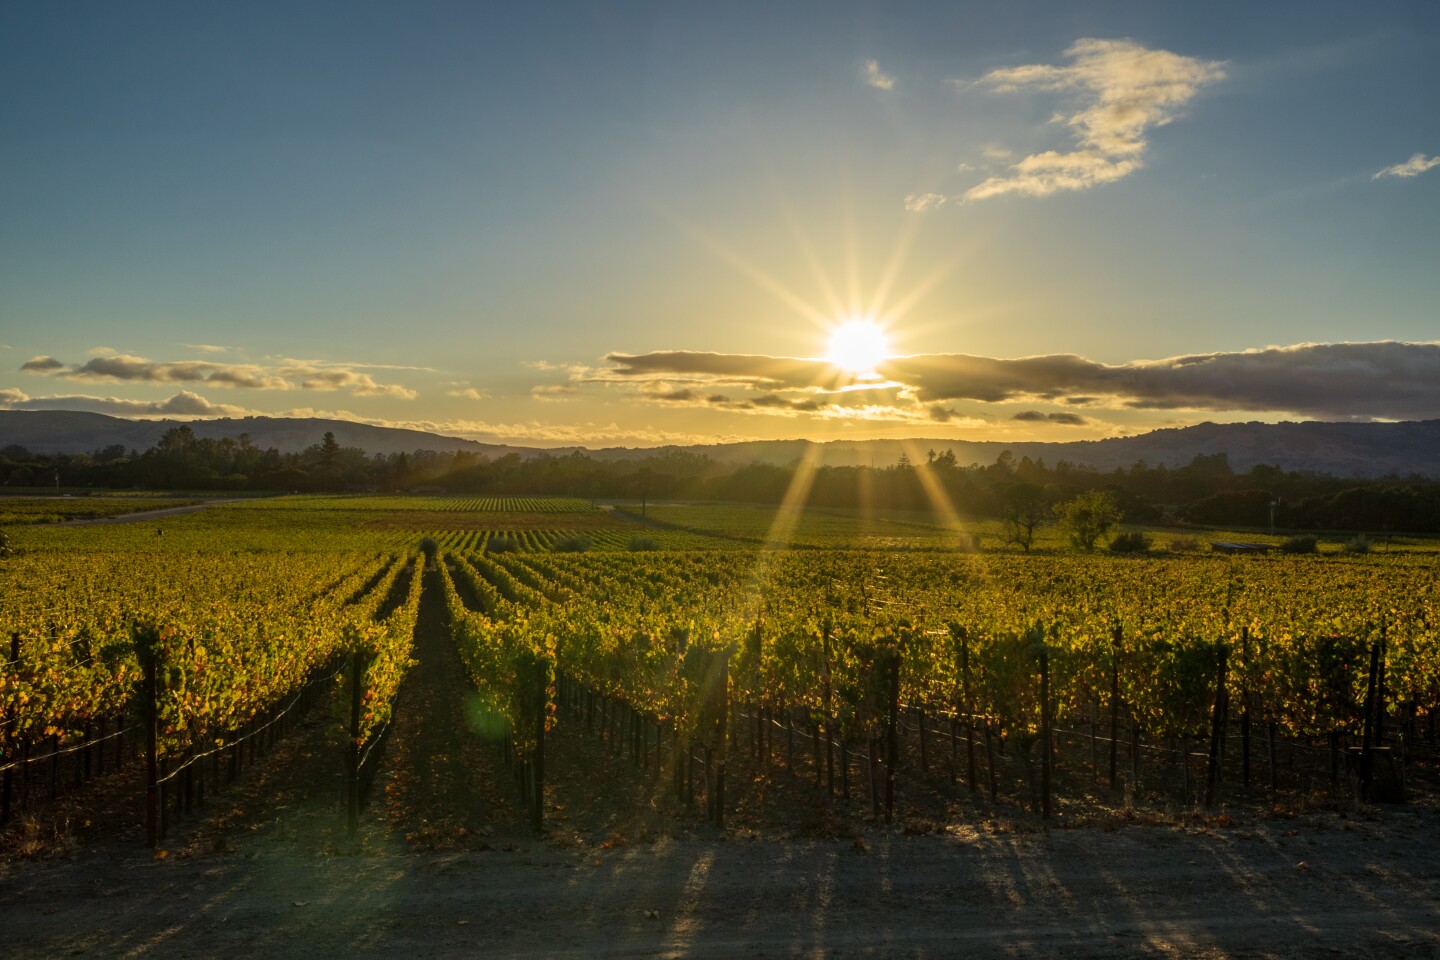 <h2>Valley of the Moon, Sonoma Valley</h2> <ul>   <li><b>Book now: </b><a class="Link" href="https://winecountrytrekking.com/store/?route=product/product&product_id=76" rel="noopener">Valley of the Moon</a>; $1,925 per person</li>  </ul> <p>Less of a point-to-point hike and more of a self-guided tour of state and local parks, the Sonoma Valley Hikers Trek offered by California-based Wine Country Trekking is a combination of long hikes in picturesque locations such as Kenwood and Glen Ellen, wine tastings overlooking vineyards, and dinner at local restaurants. And yes, breakfast, wine samples, and luggage transfers are included.<br>Over five days and four nights, you’ll spend three days hiking (the first and last days are reserved for arrival and relaxing before departure) about eight to nine miles per day up mountains, past lakes, and through orchards. You’ll also partake in picnic lunches, sip wine from local vineyards, and relax at luxury inns along the way. Depending on the day, you may be transported to and from trailheads for occasionally strenuous hikes, or you may hoof it to each destination. Either way, you’ll have earned your libations at the end of the day.</p>